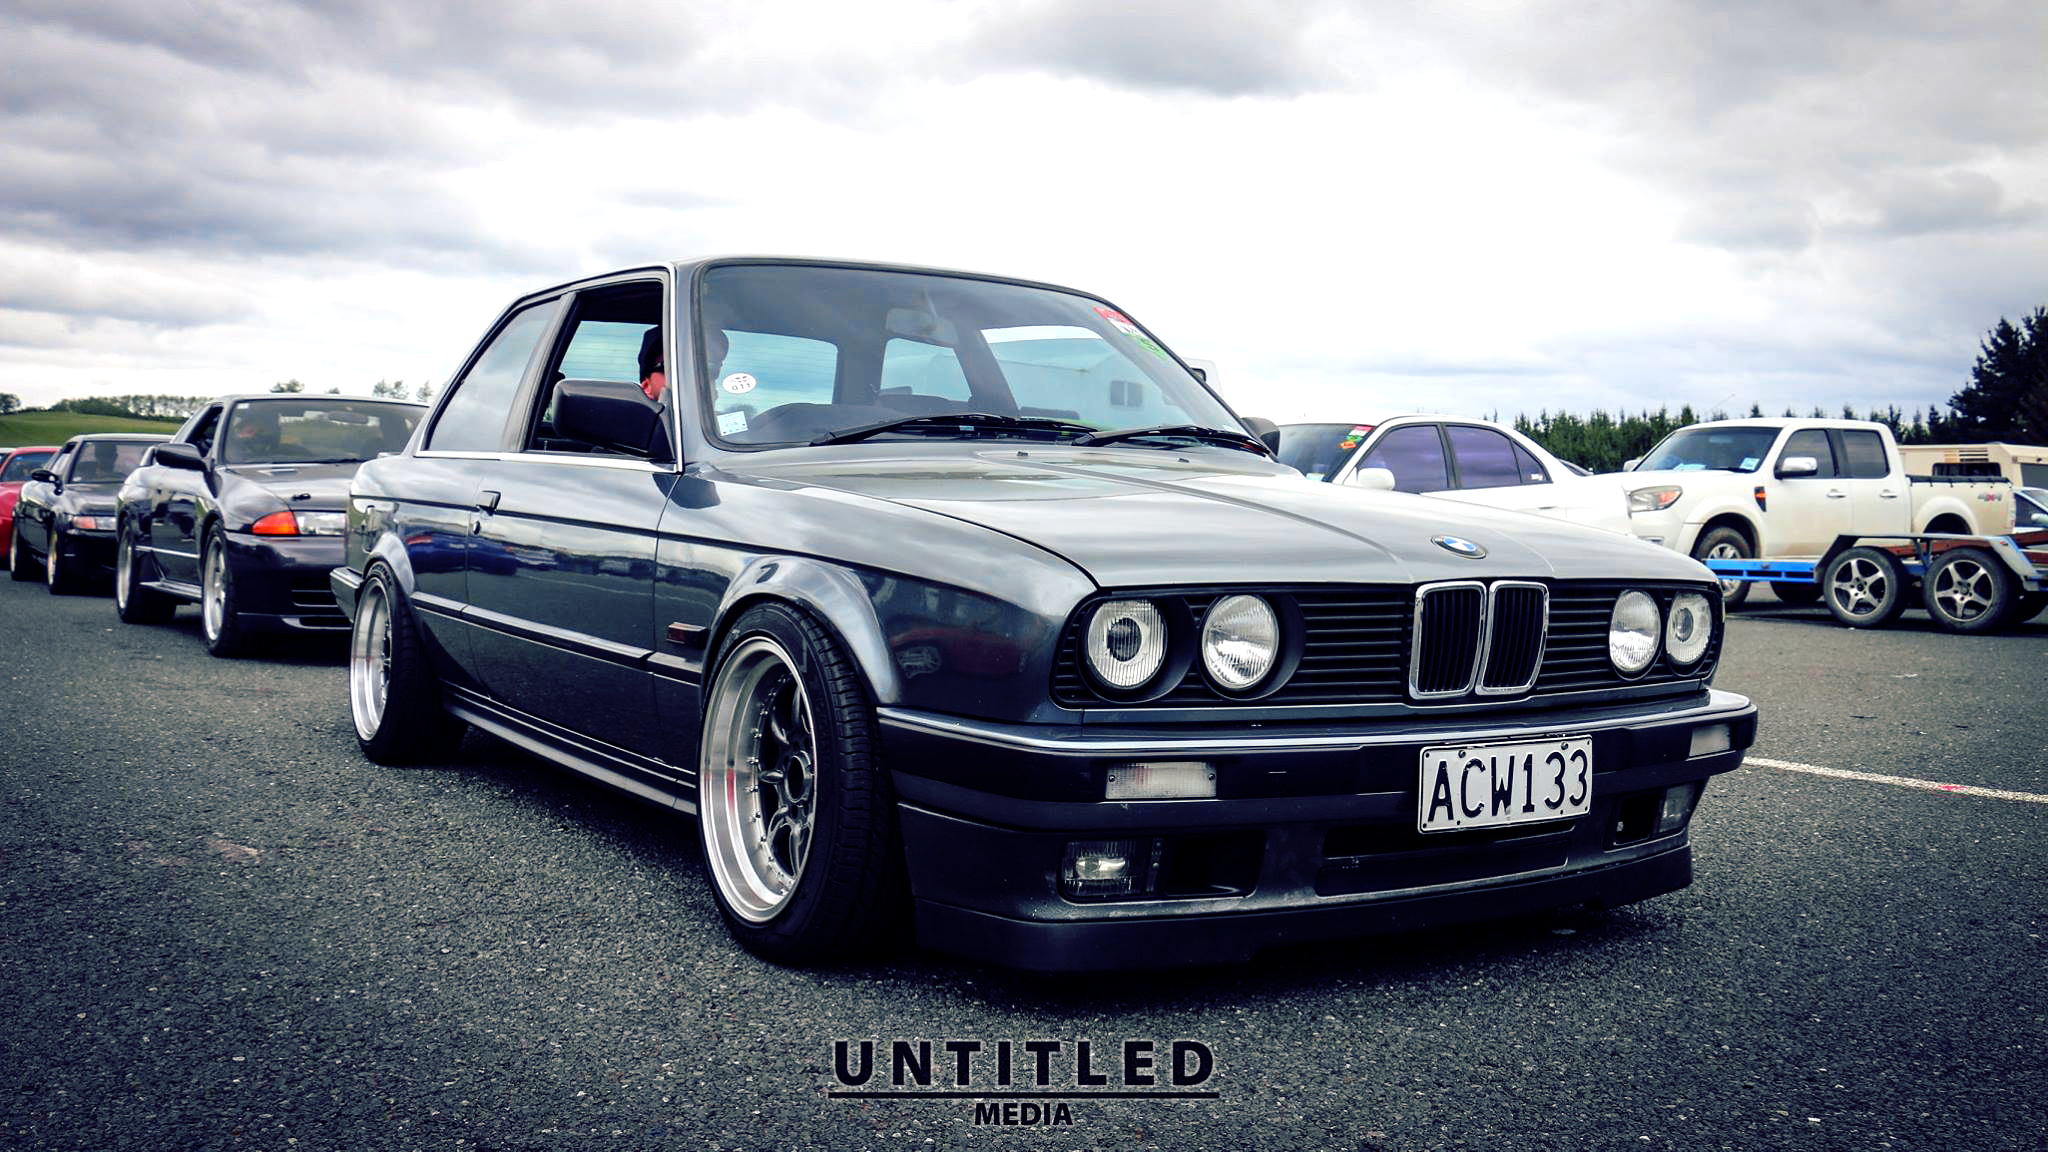 General 2048x1152 Untitled Media photography car BMW BMW E30 BMW 3 Series vehicle numbers